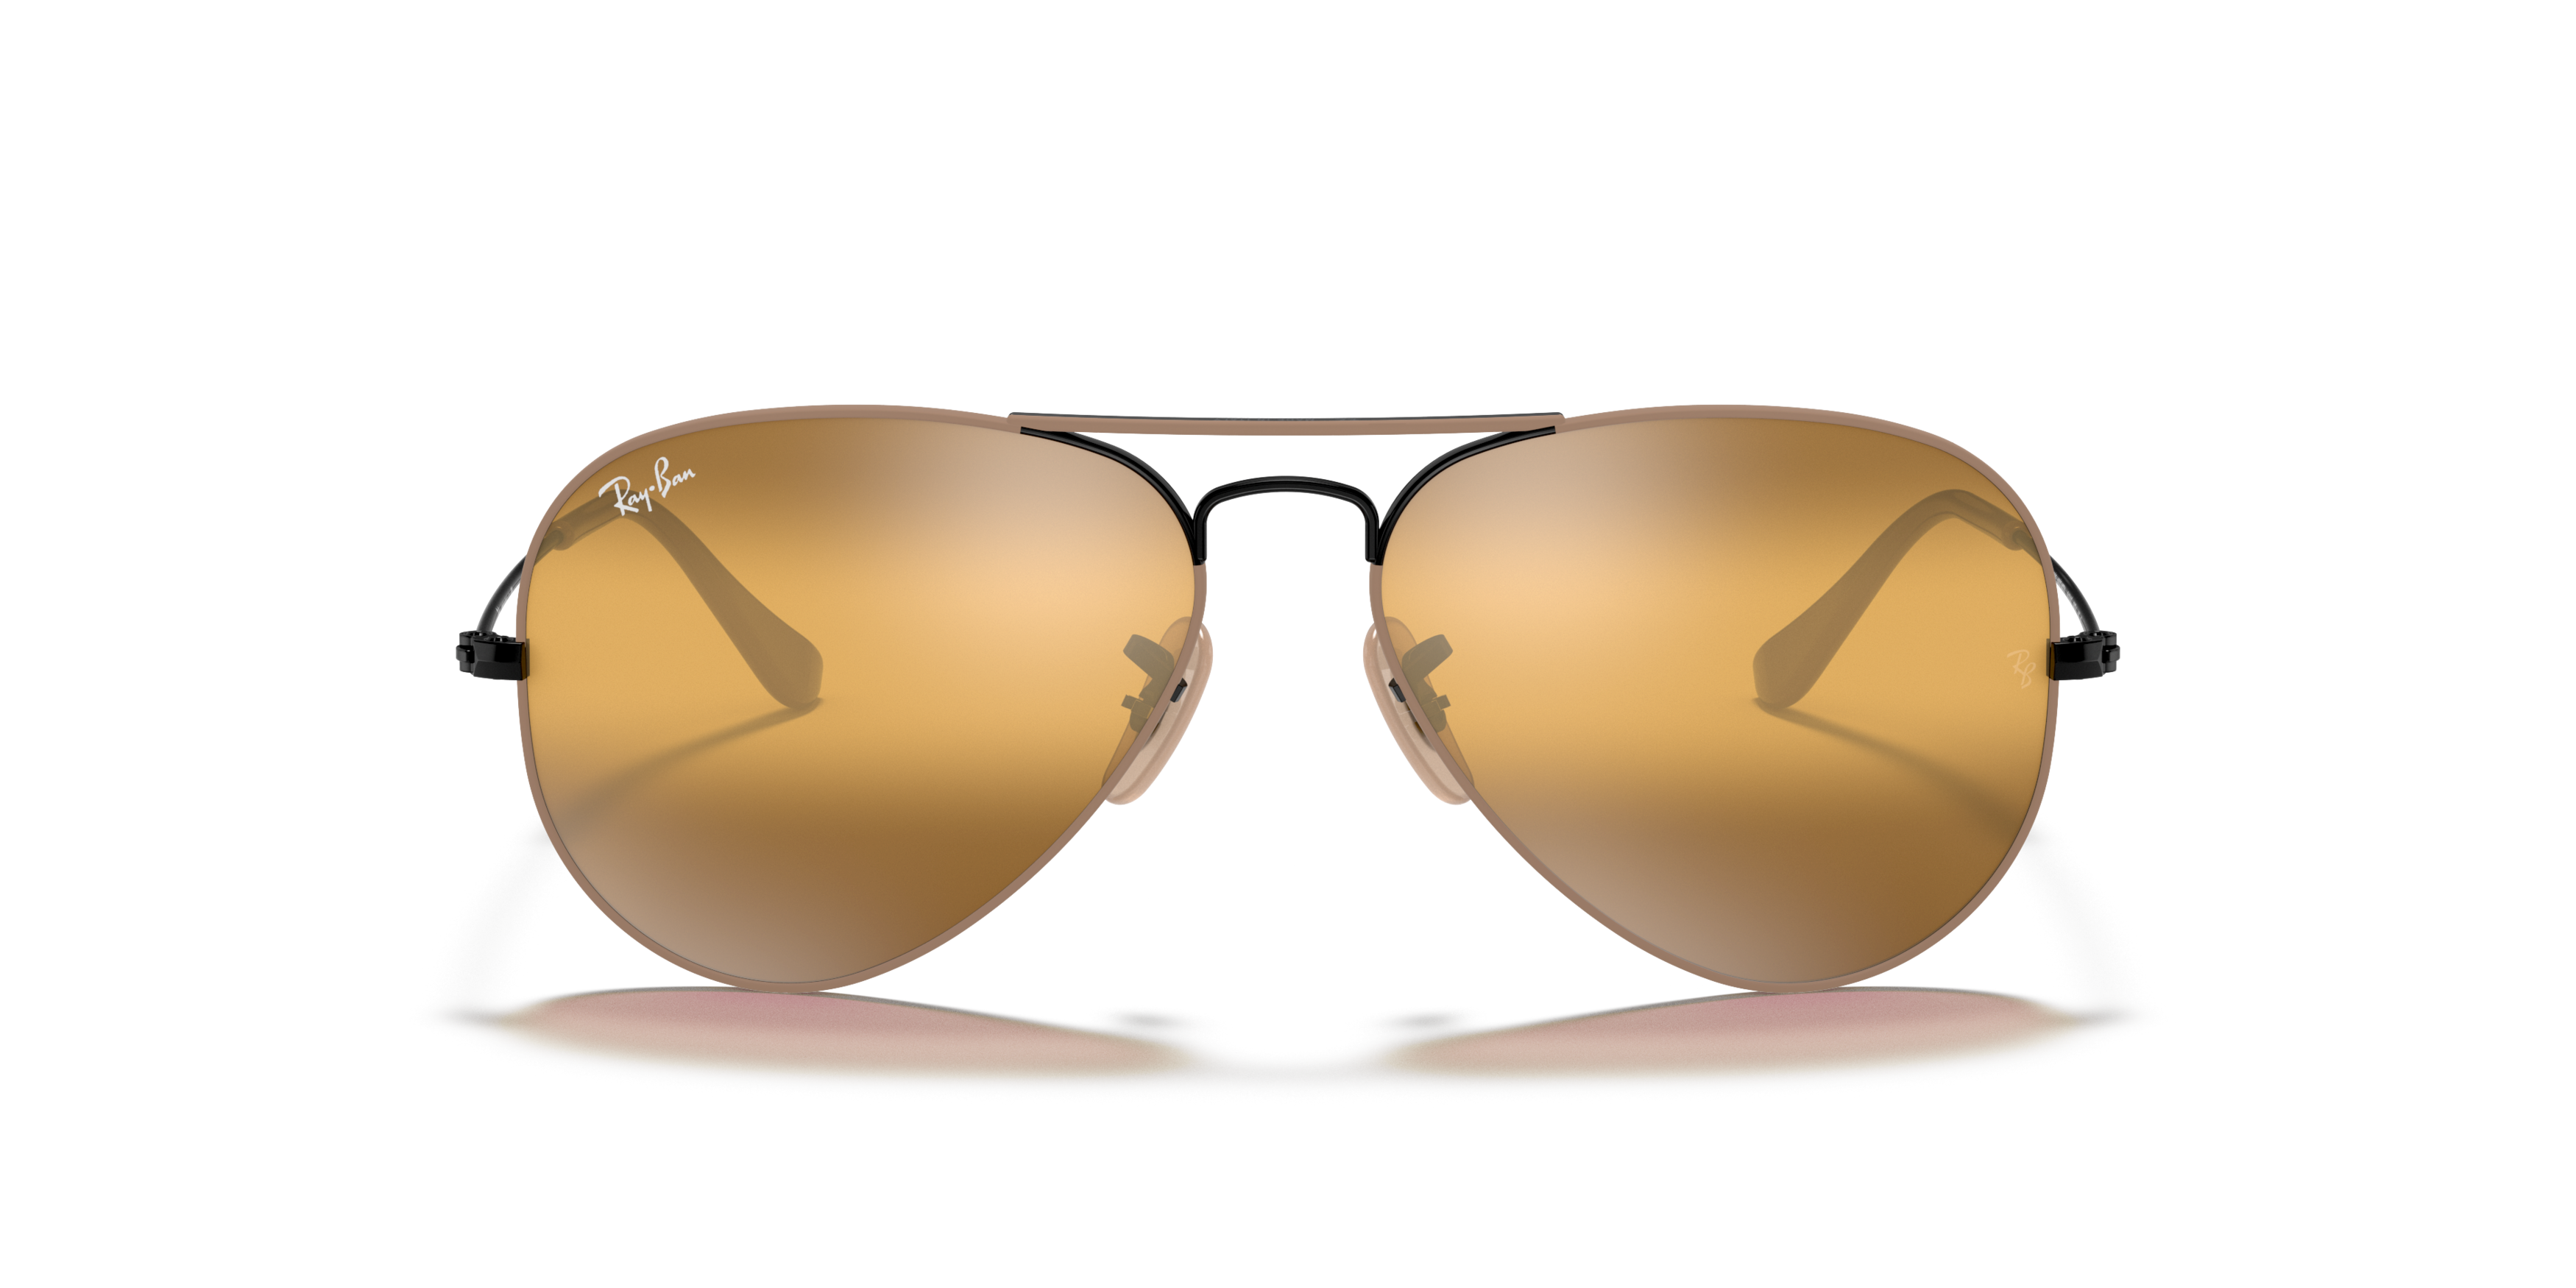 [products.image.front] Ray-Ban Aviator Mirror RB3025 9153AG